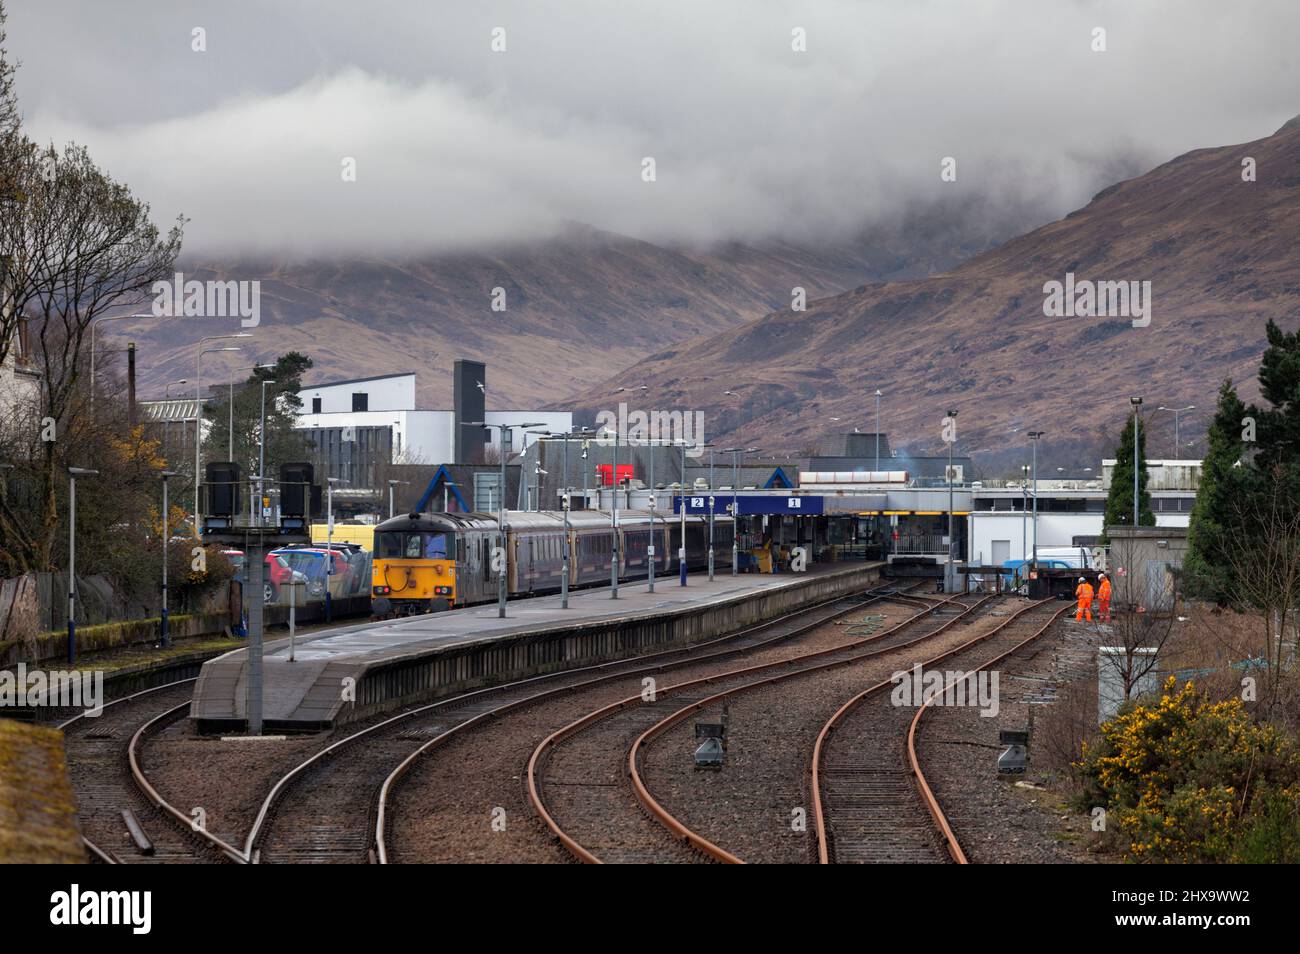 A Class 73 locomotive shunting the carriages from the Caledonian sleeper train after it had arrived at Fort William from London Euston Stock Photo